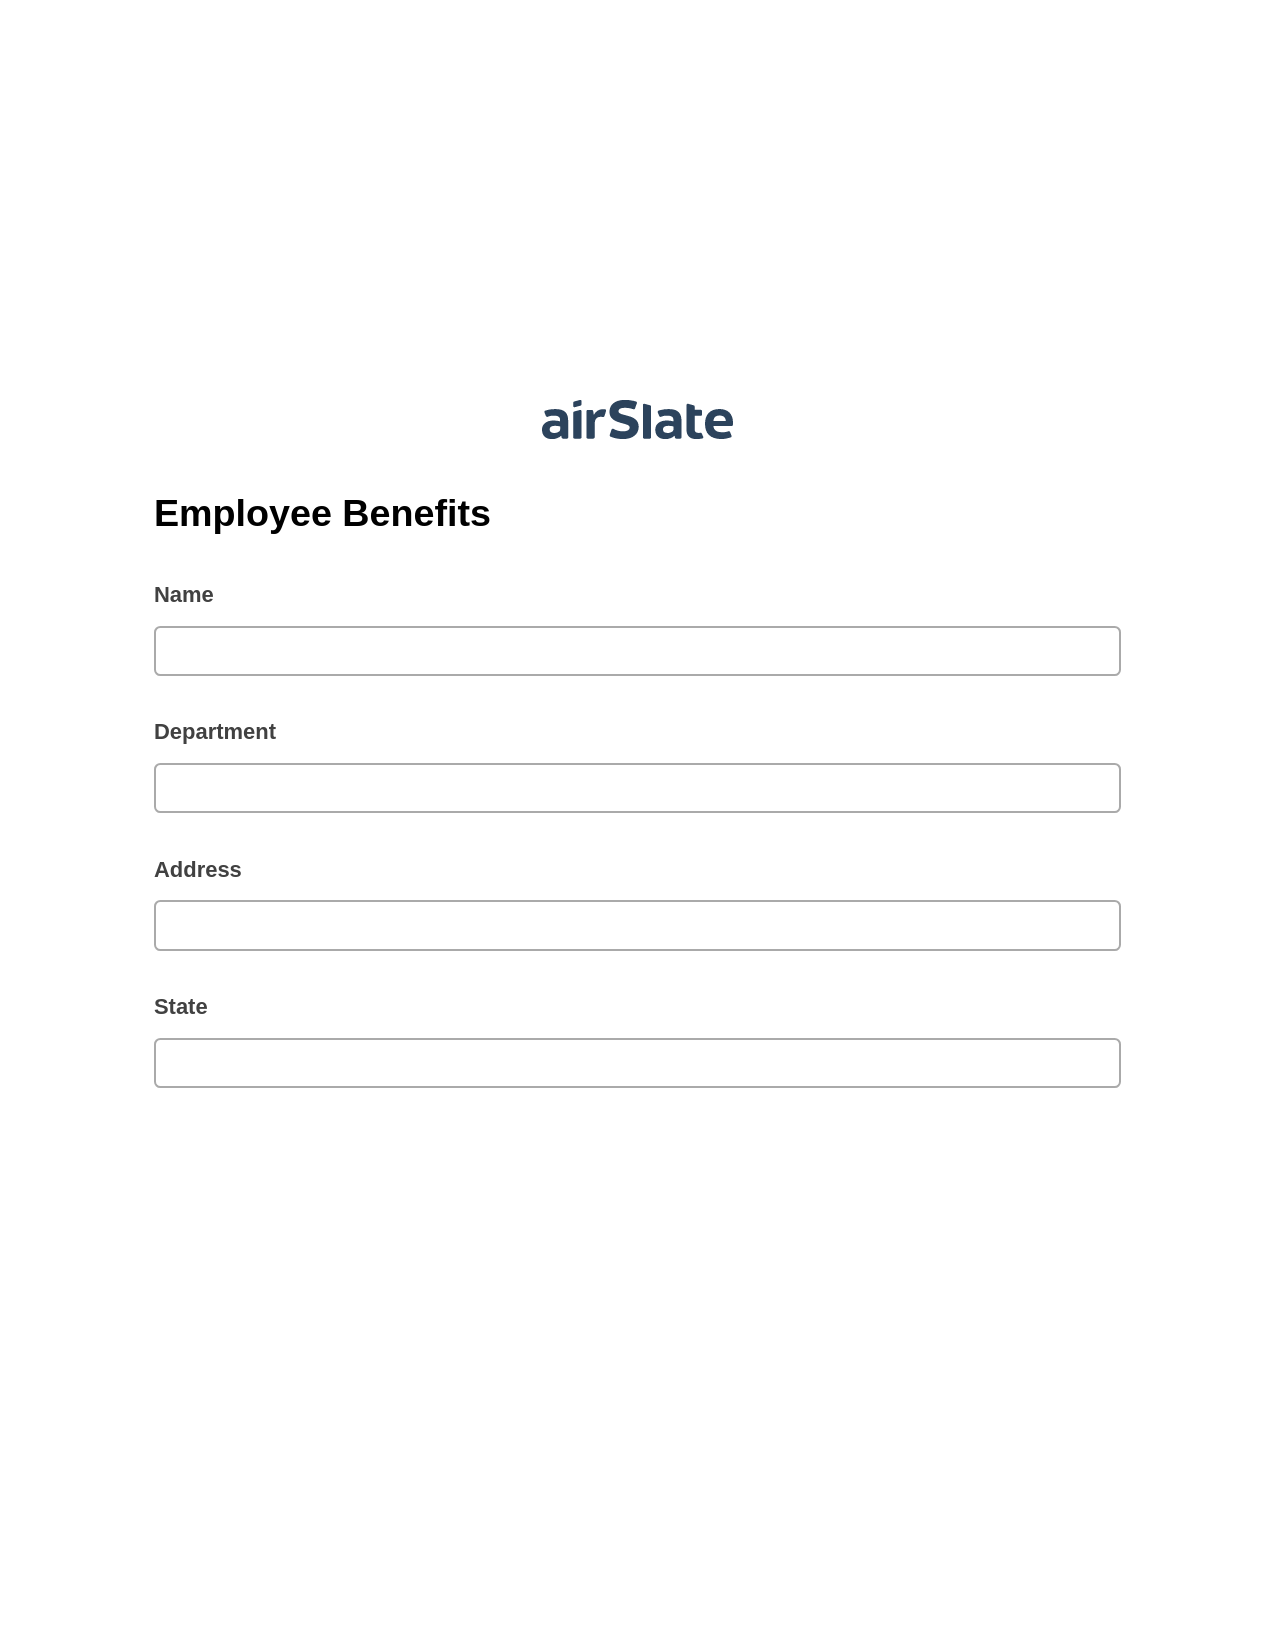 Employee Benefits Pre-fill from Salesforce Record Bot, Send a Slate to Salesforce Contact Bot, Export to MySQL Bot